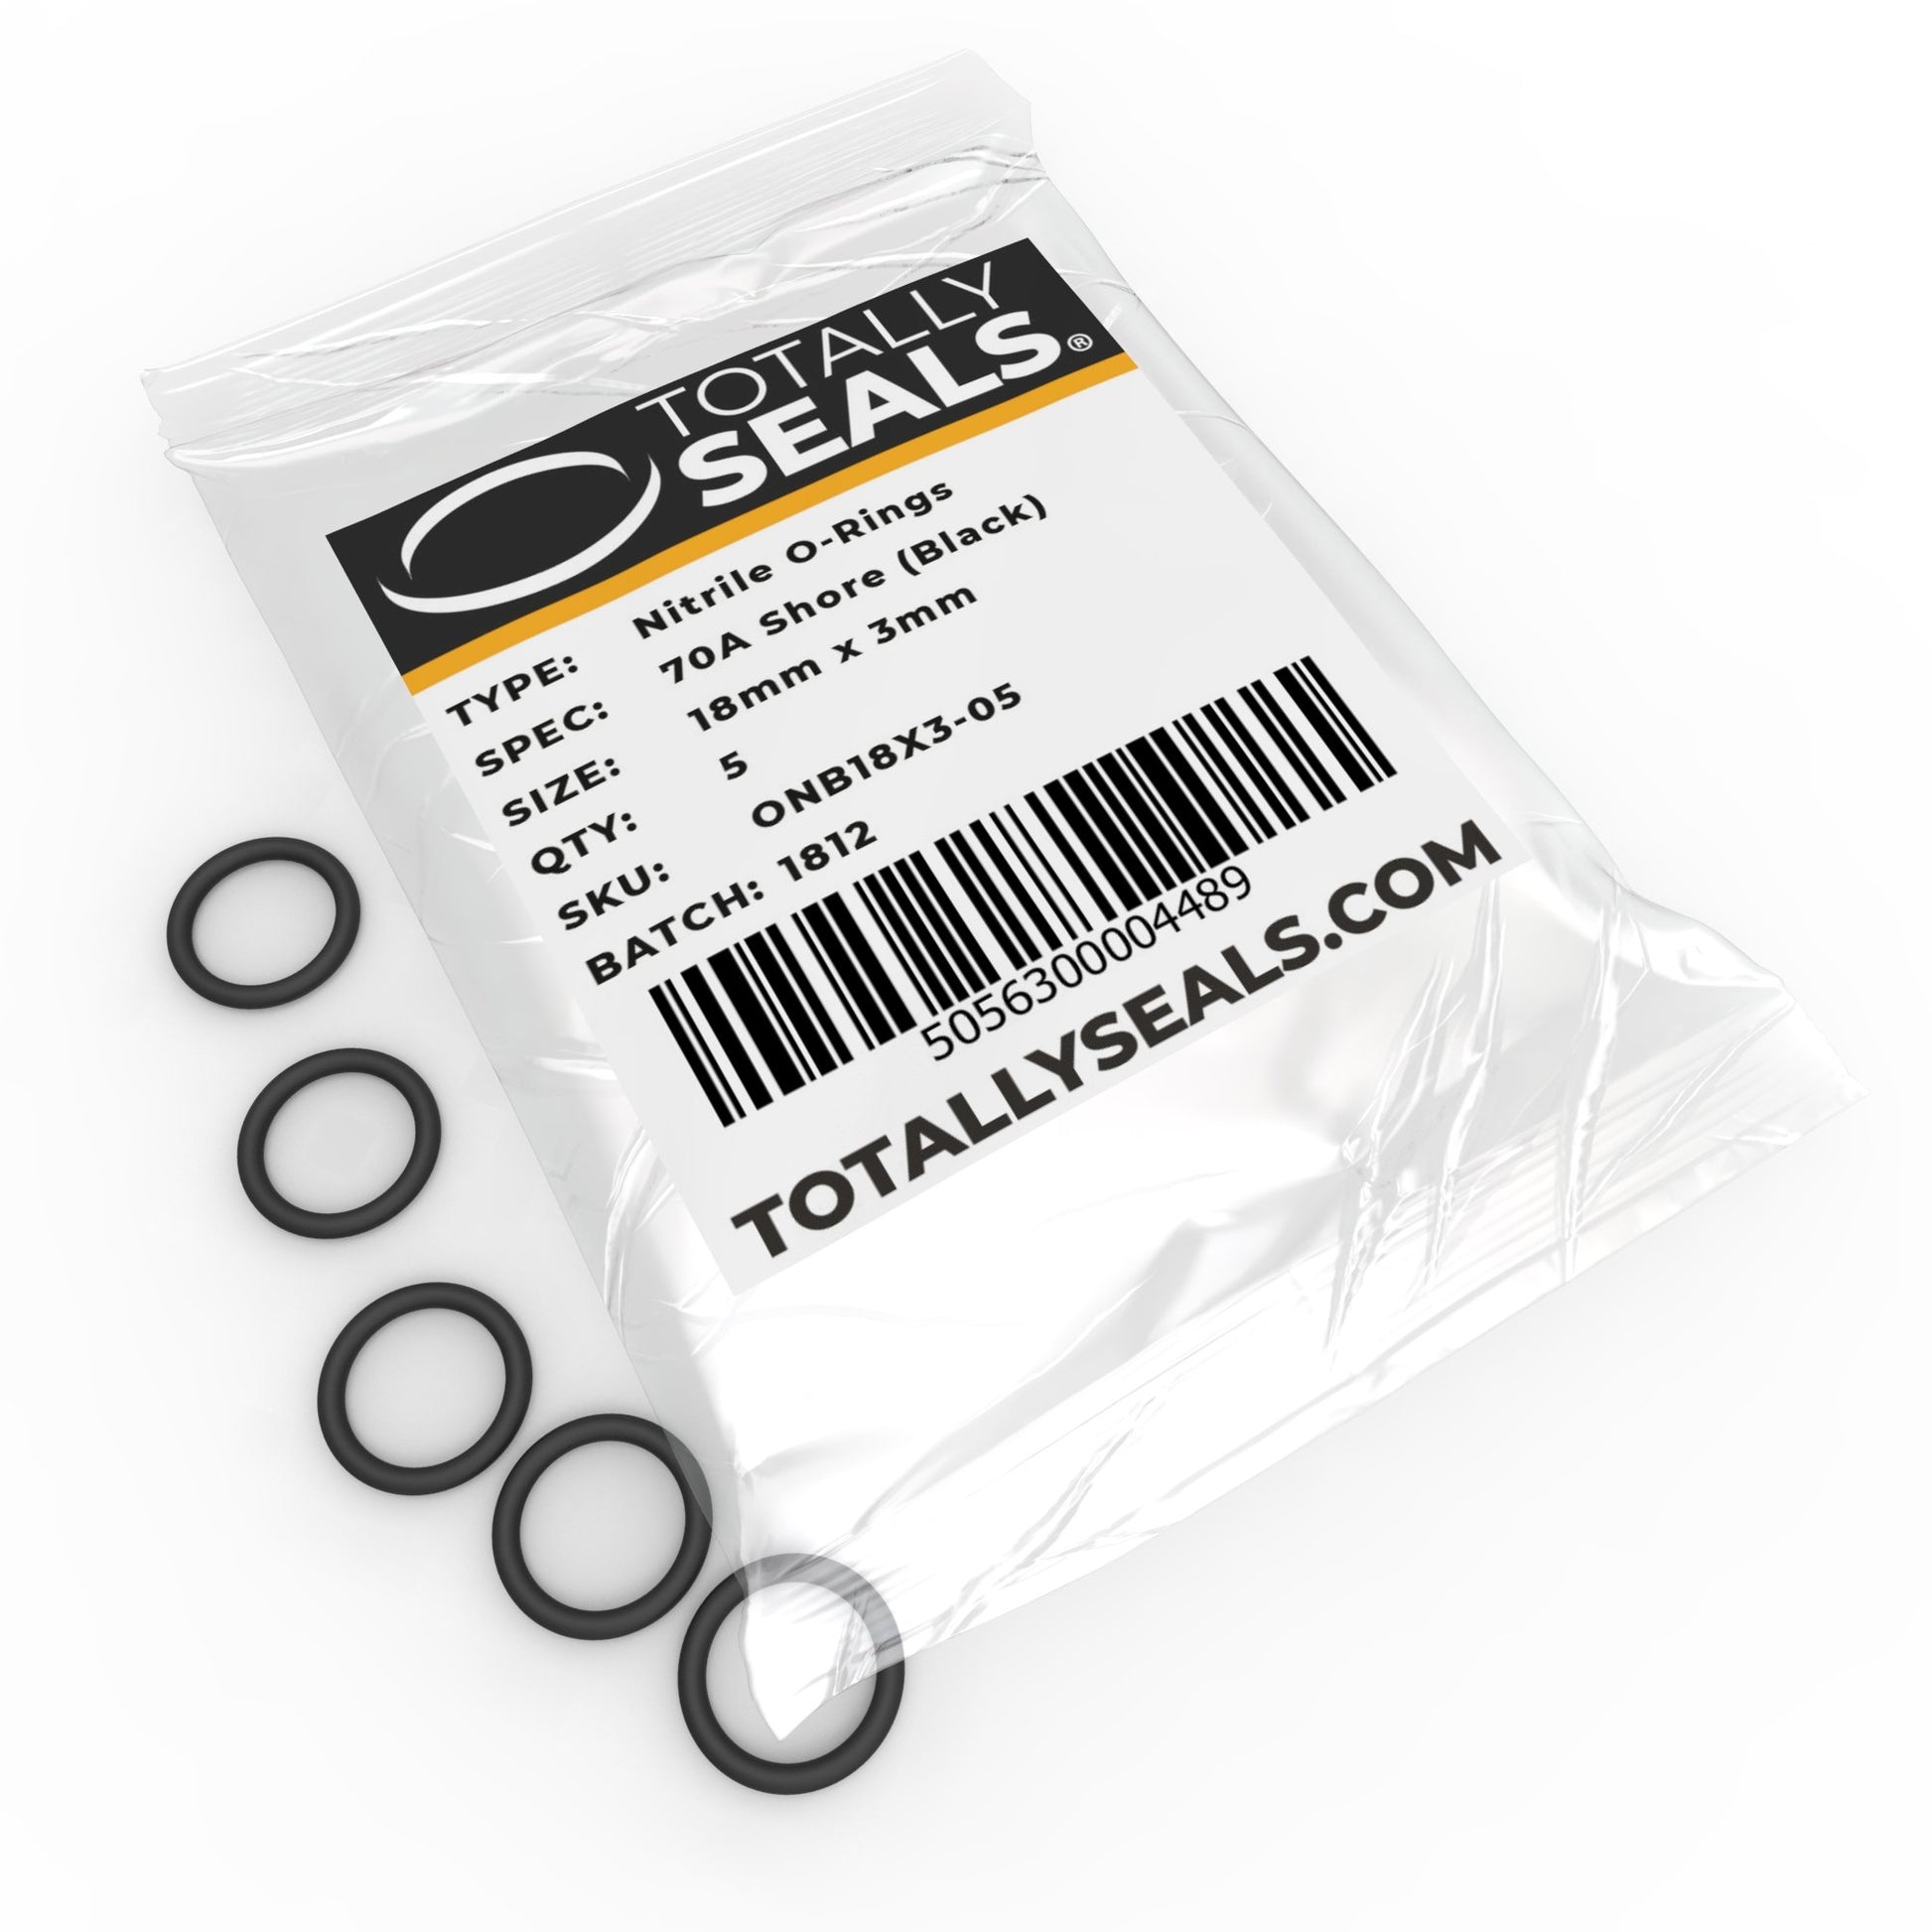 18mm x 3mm (24mm OD) Nitrile O-Rings - Totally Seals®